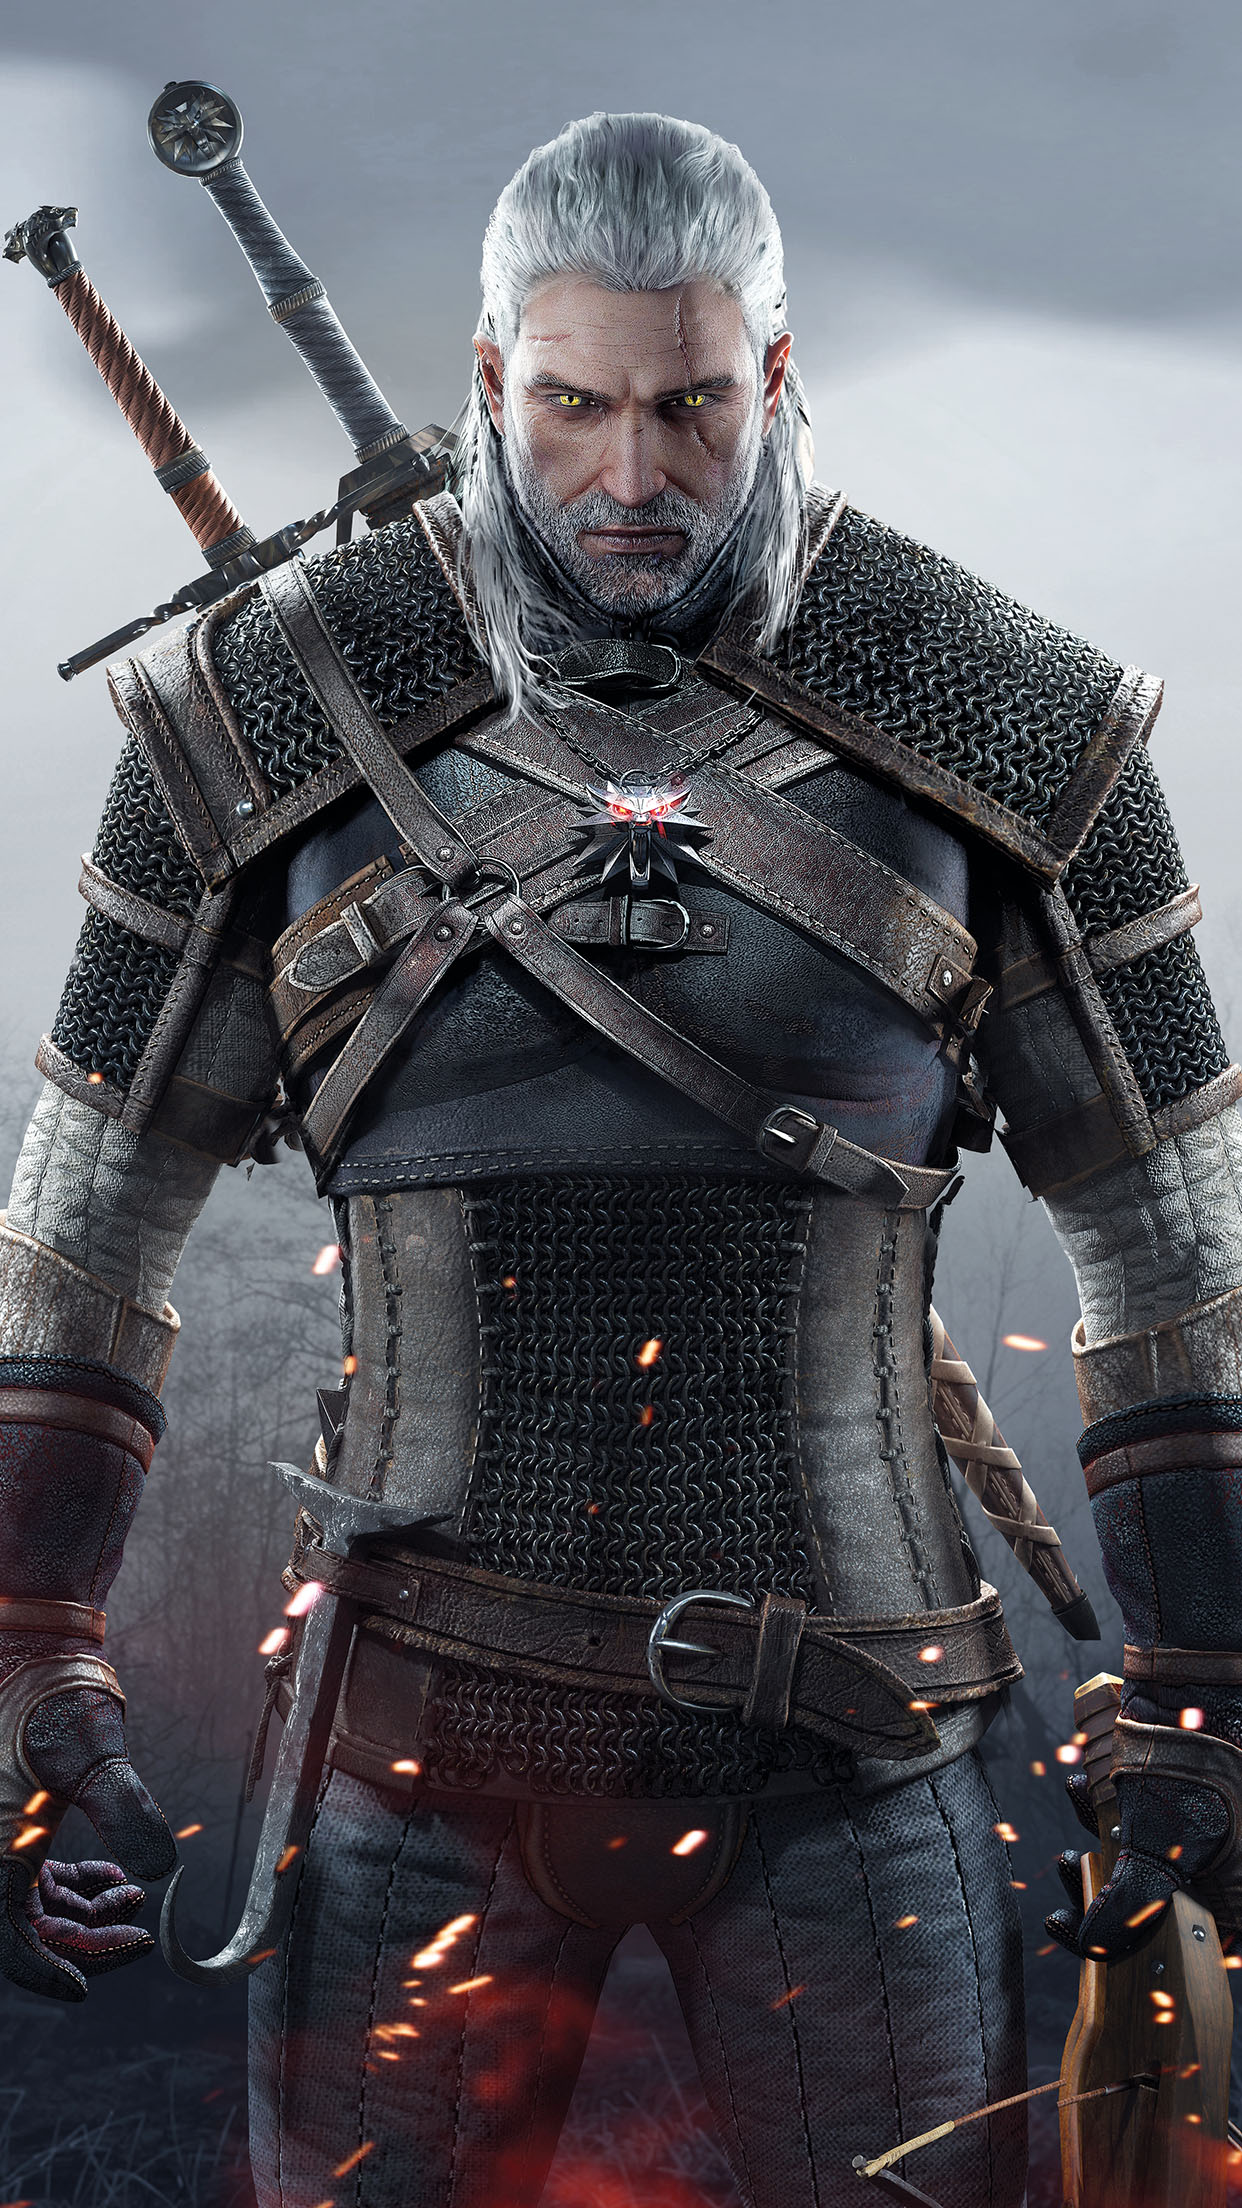 the witcher 3 wallpaper